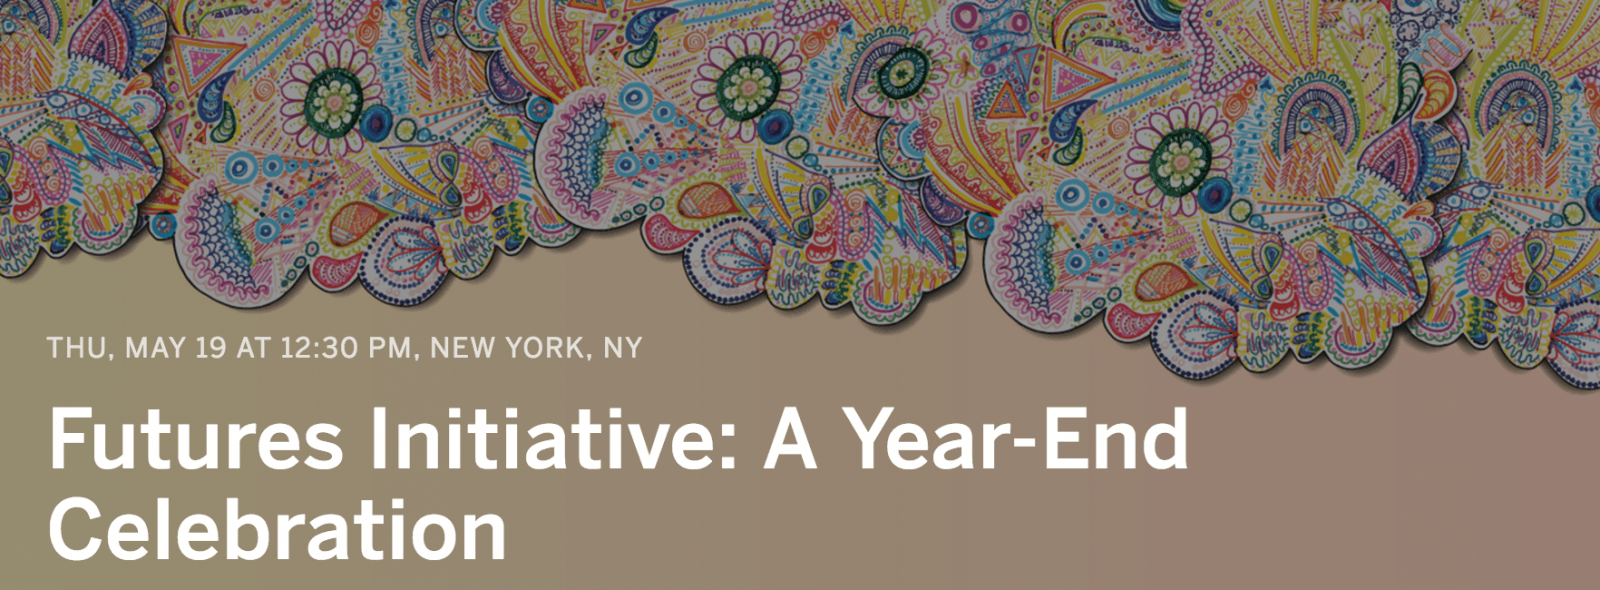 Recap: A Year-End Celebration of the Futures Initiative